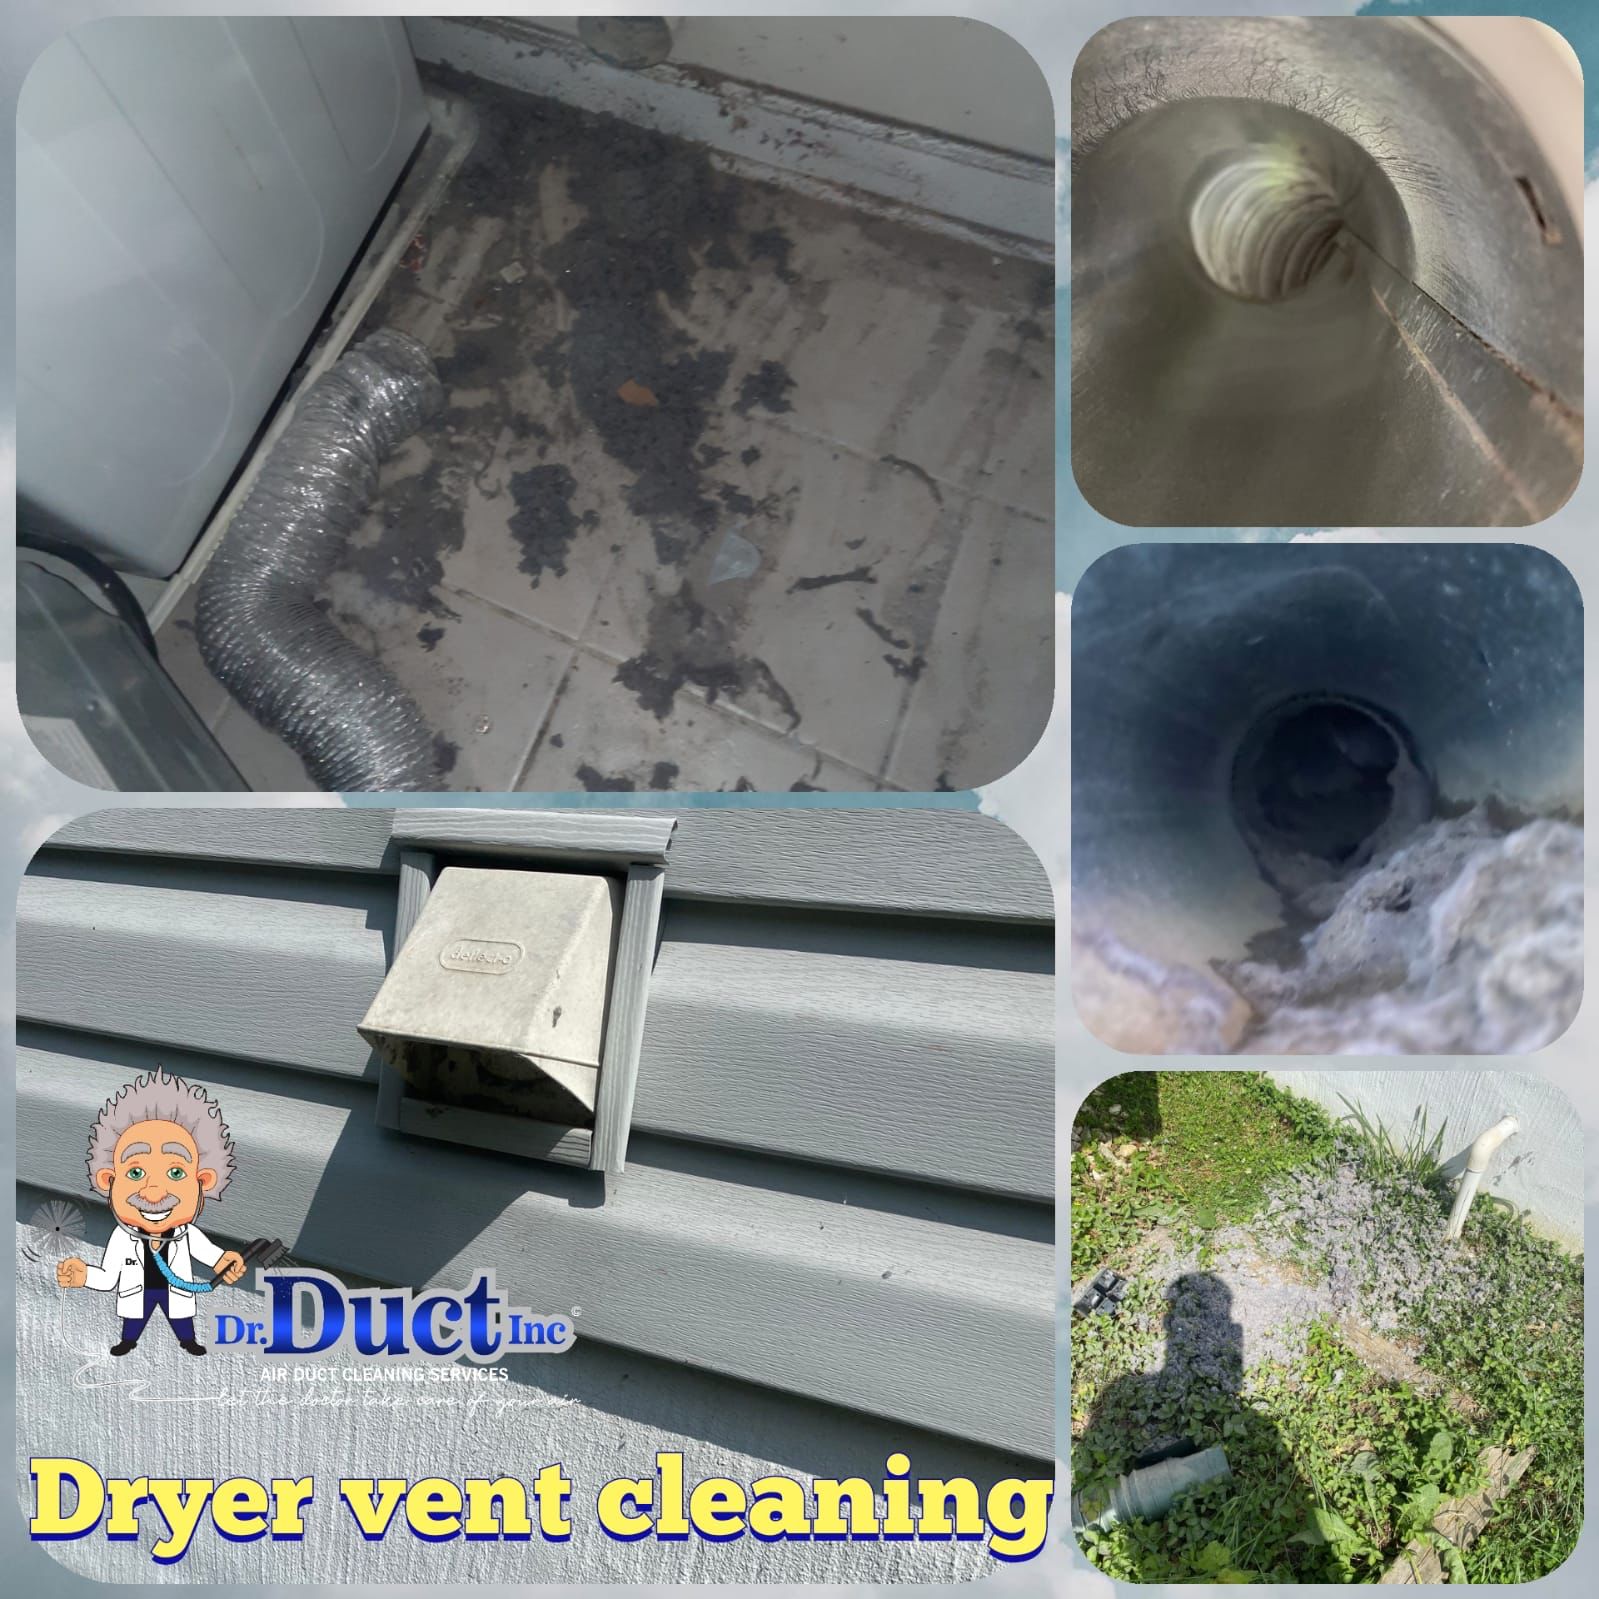 dr. duct air duct cleaning services - #1 air duct in dmv area